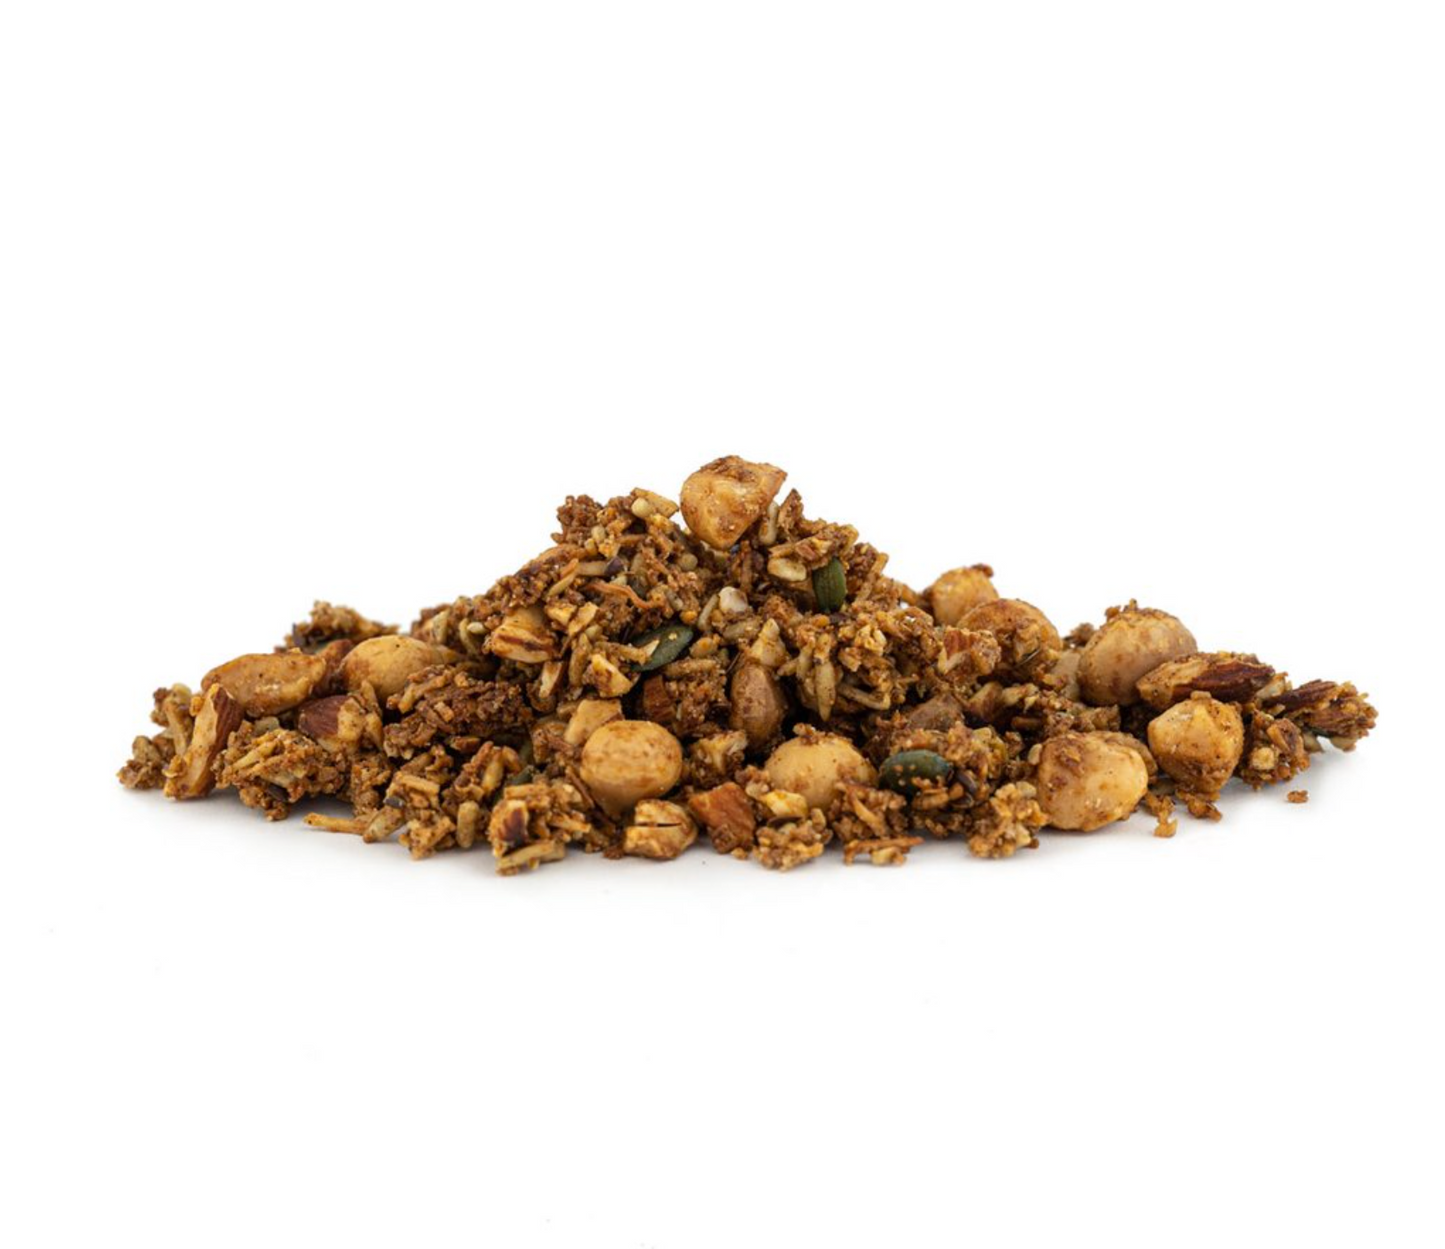 The Monday Food Co Keto Gourmet Granola 300g Or 800g, Sweet Crunchy Macadamia Clusters Flavour